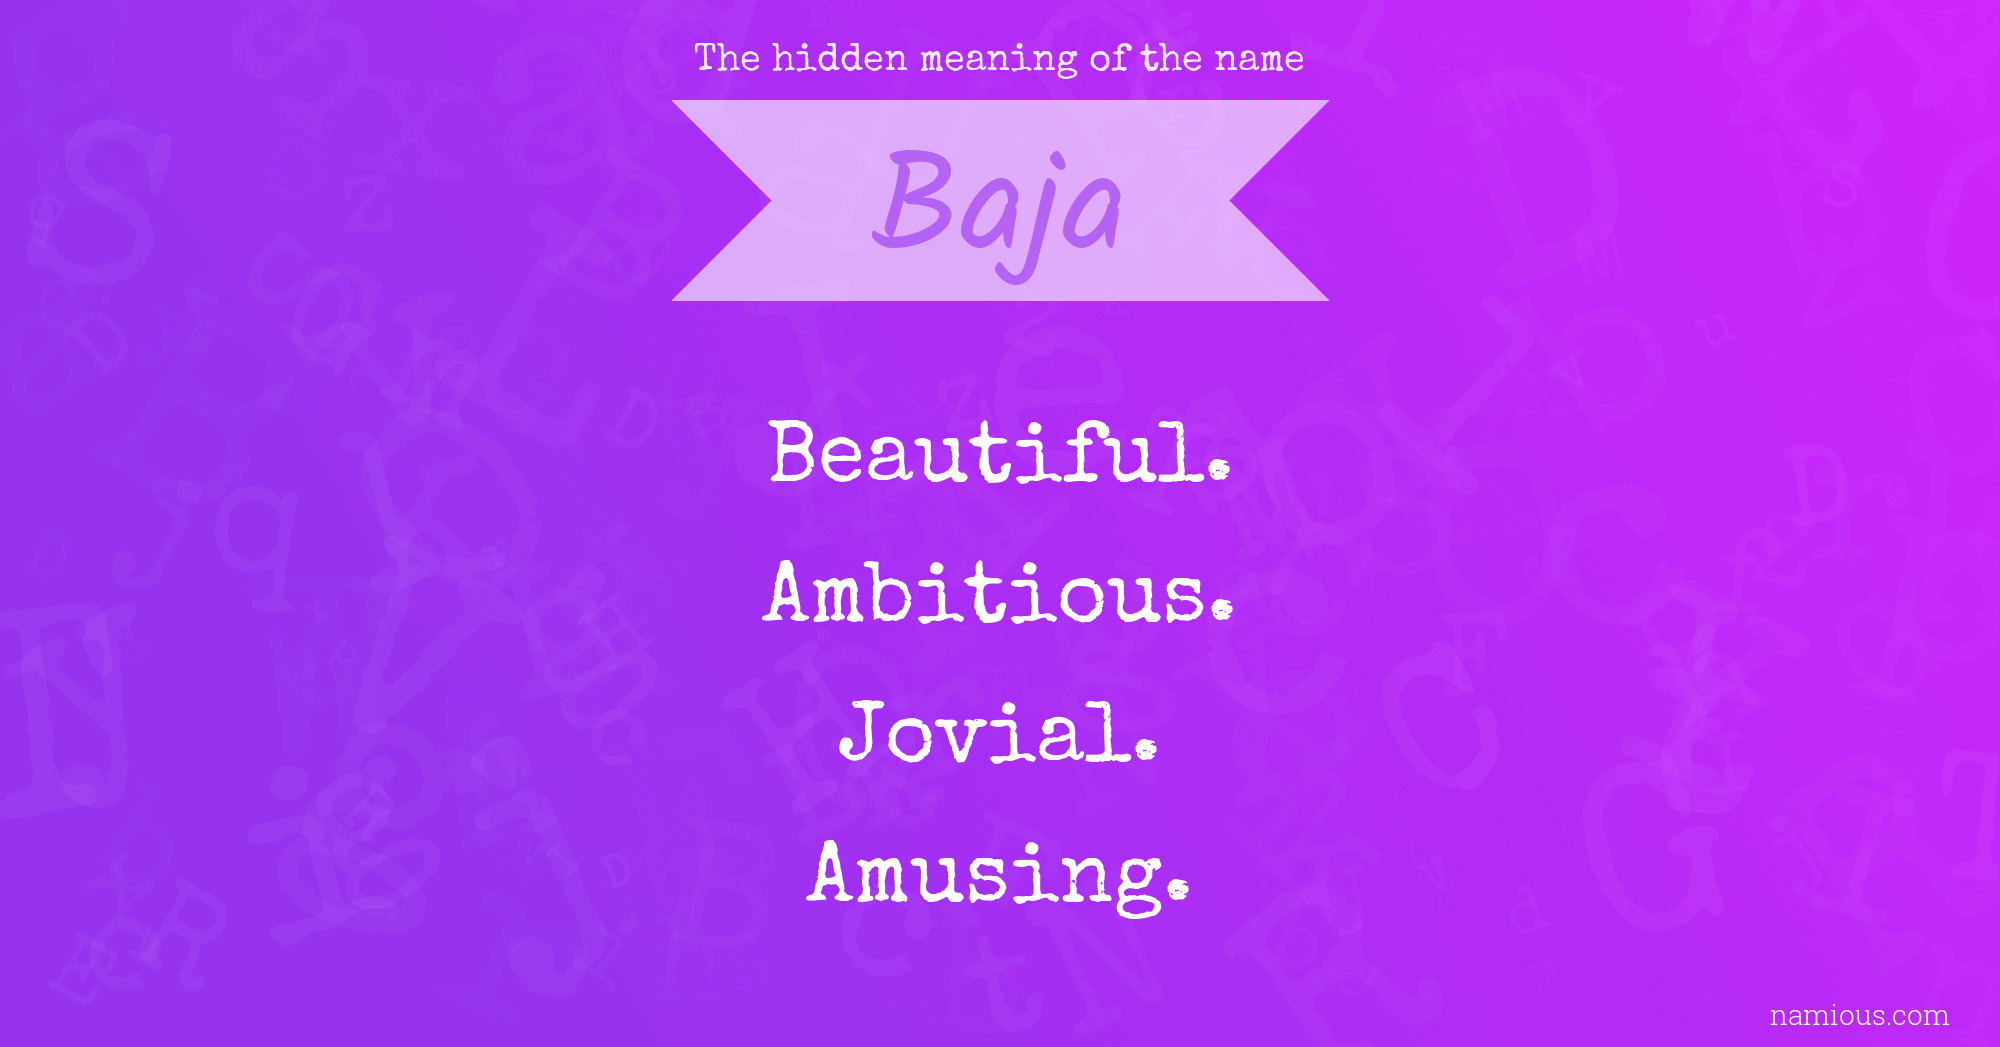 The hidden meaning of the name Baja